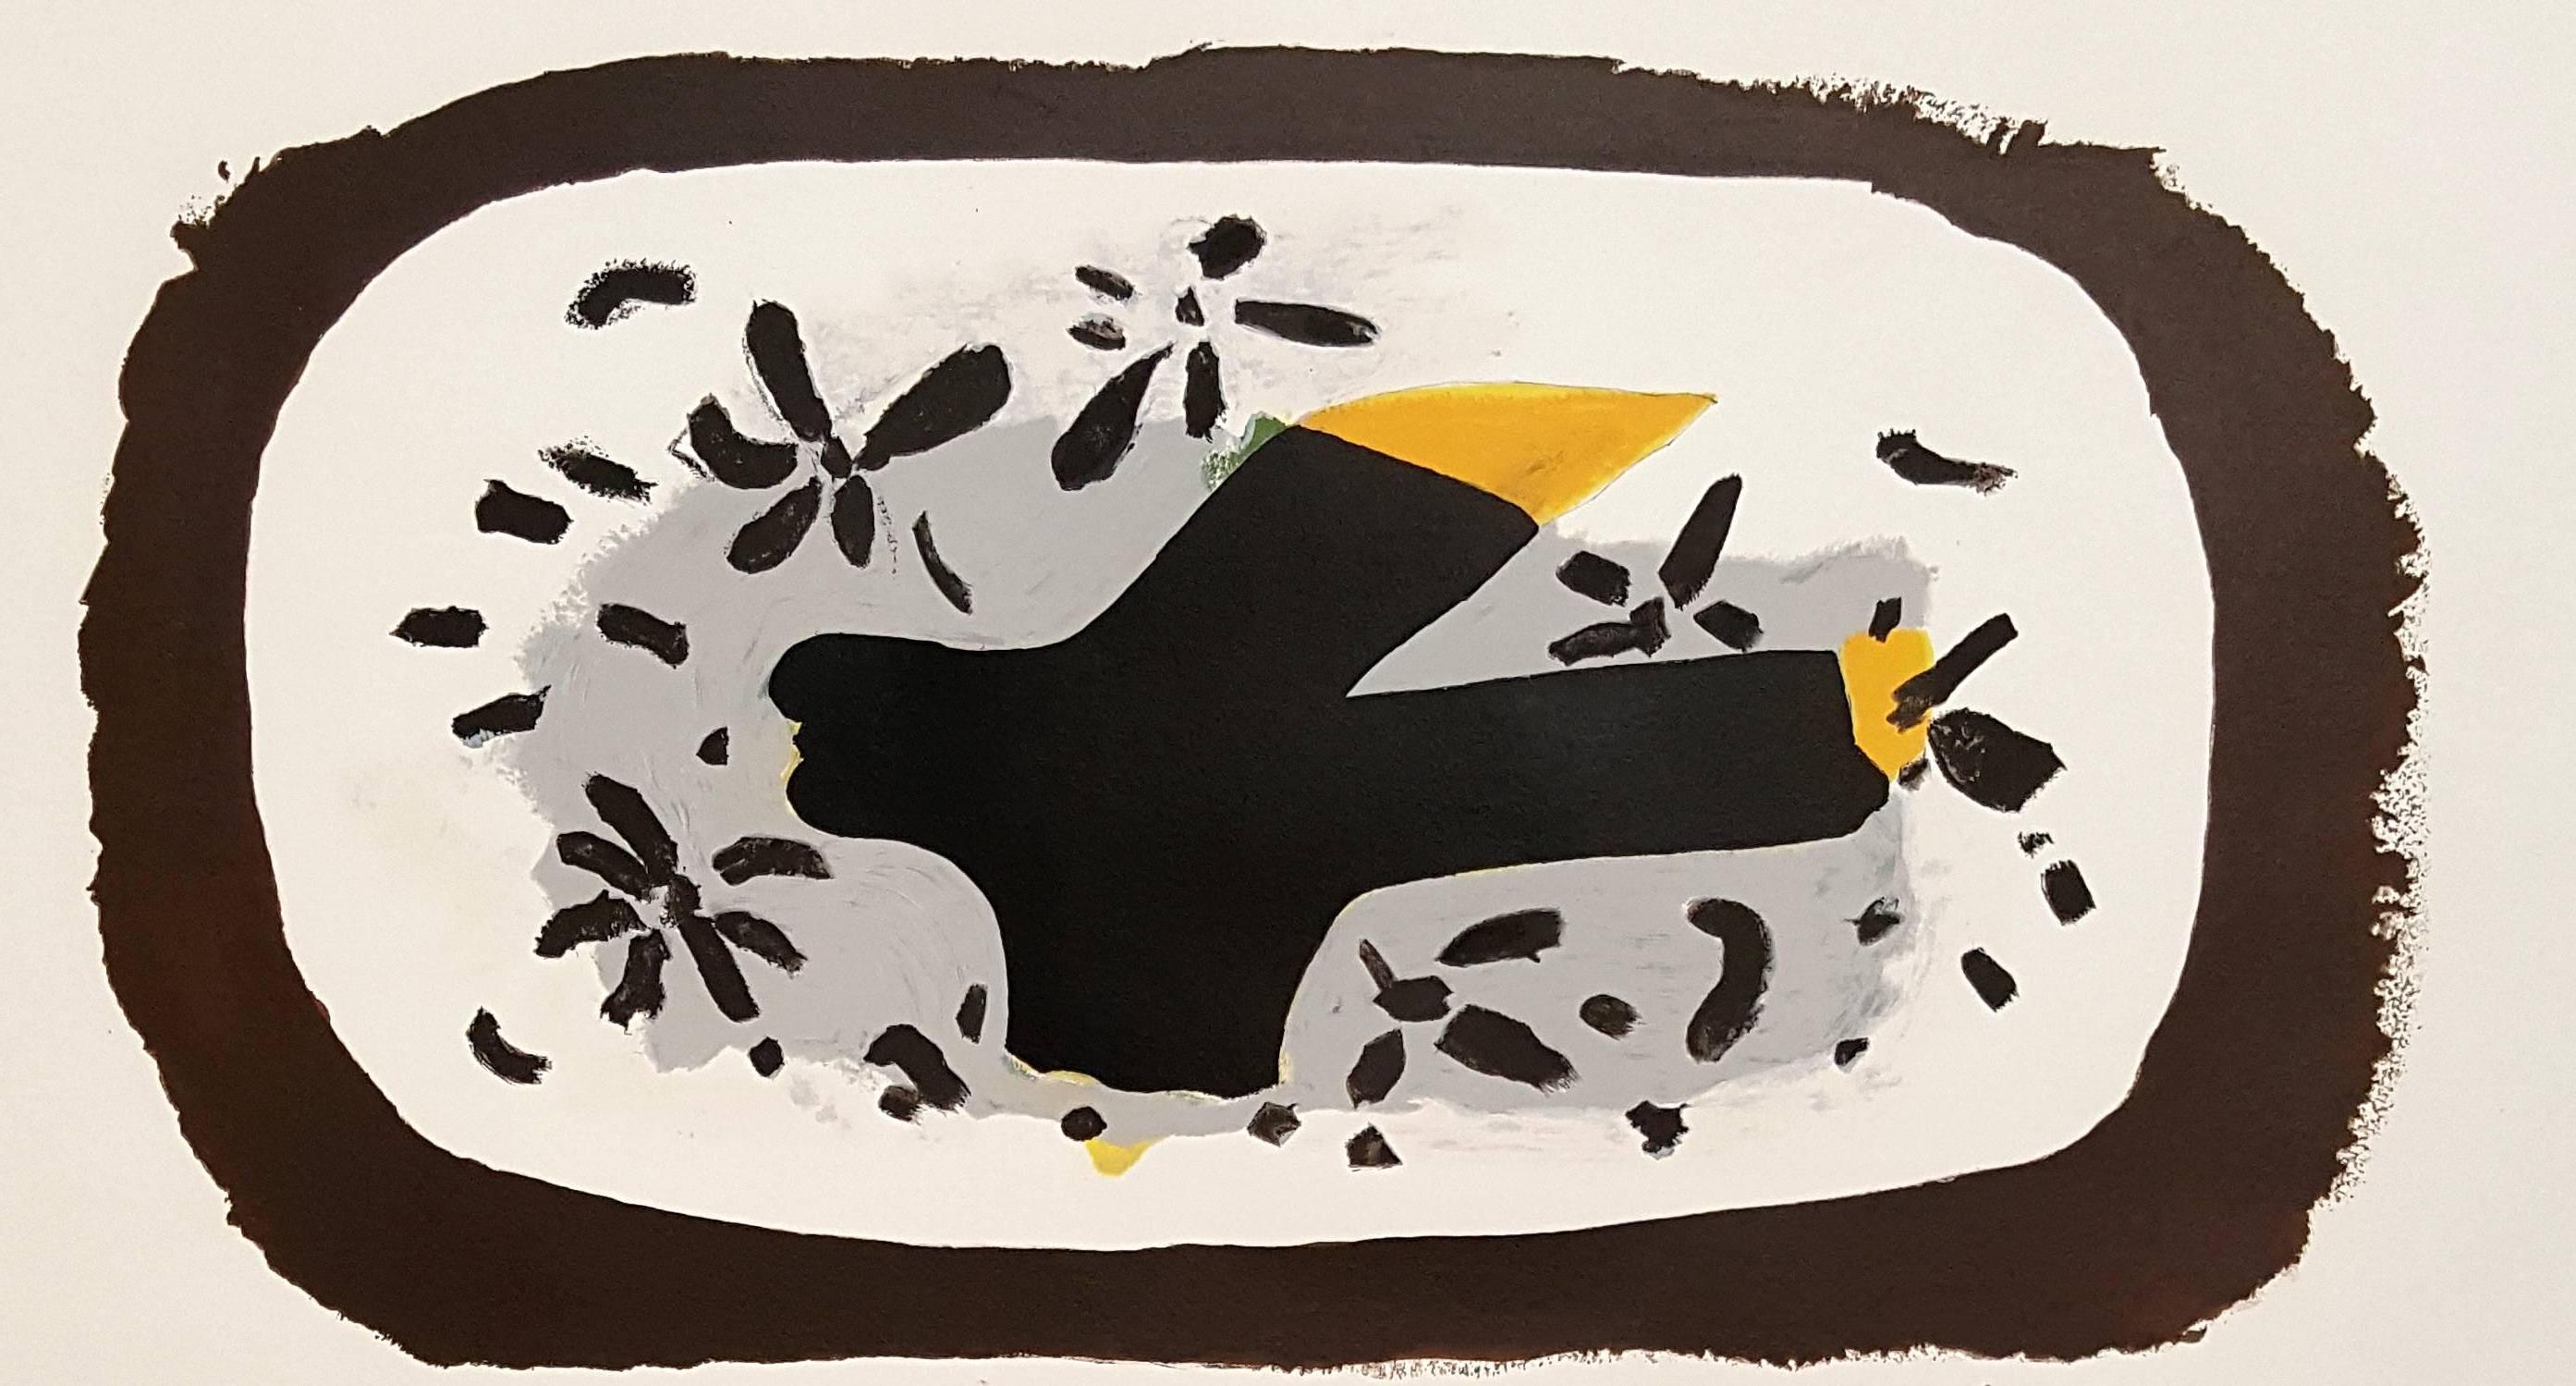 Georges BRAQUE
October bird

Original lithograph, 1962
Handsigned in pencil and dedicated 